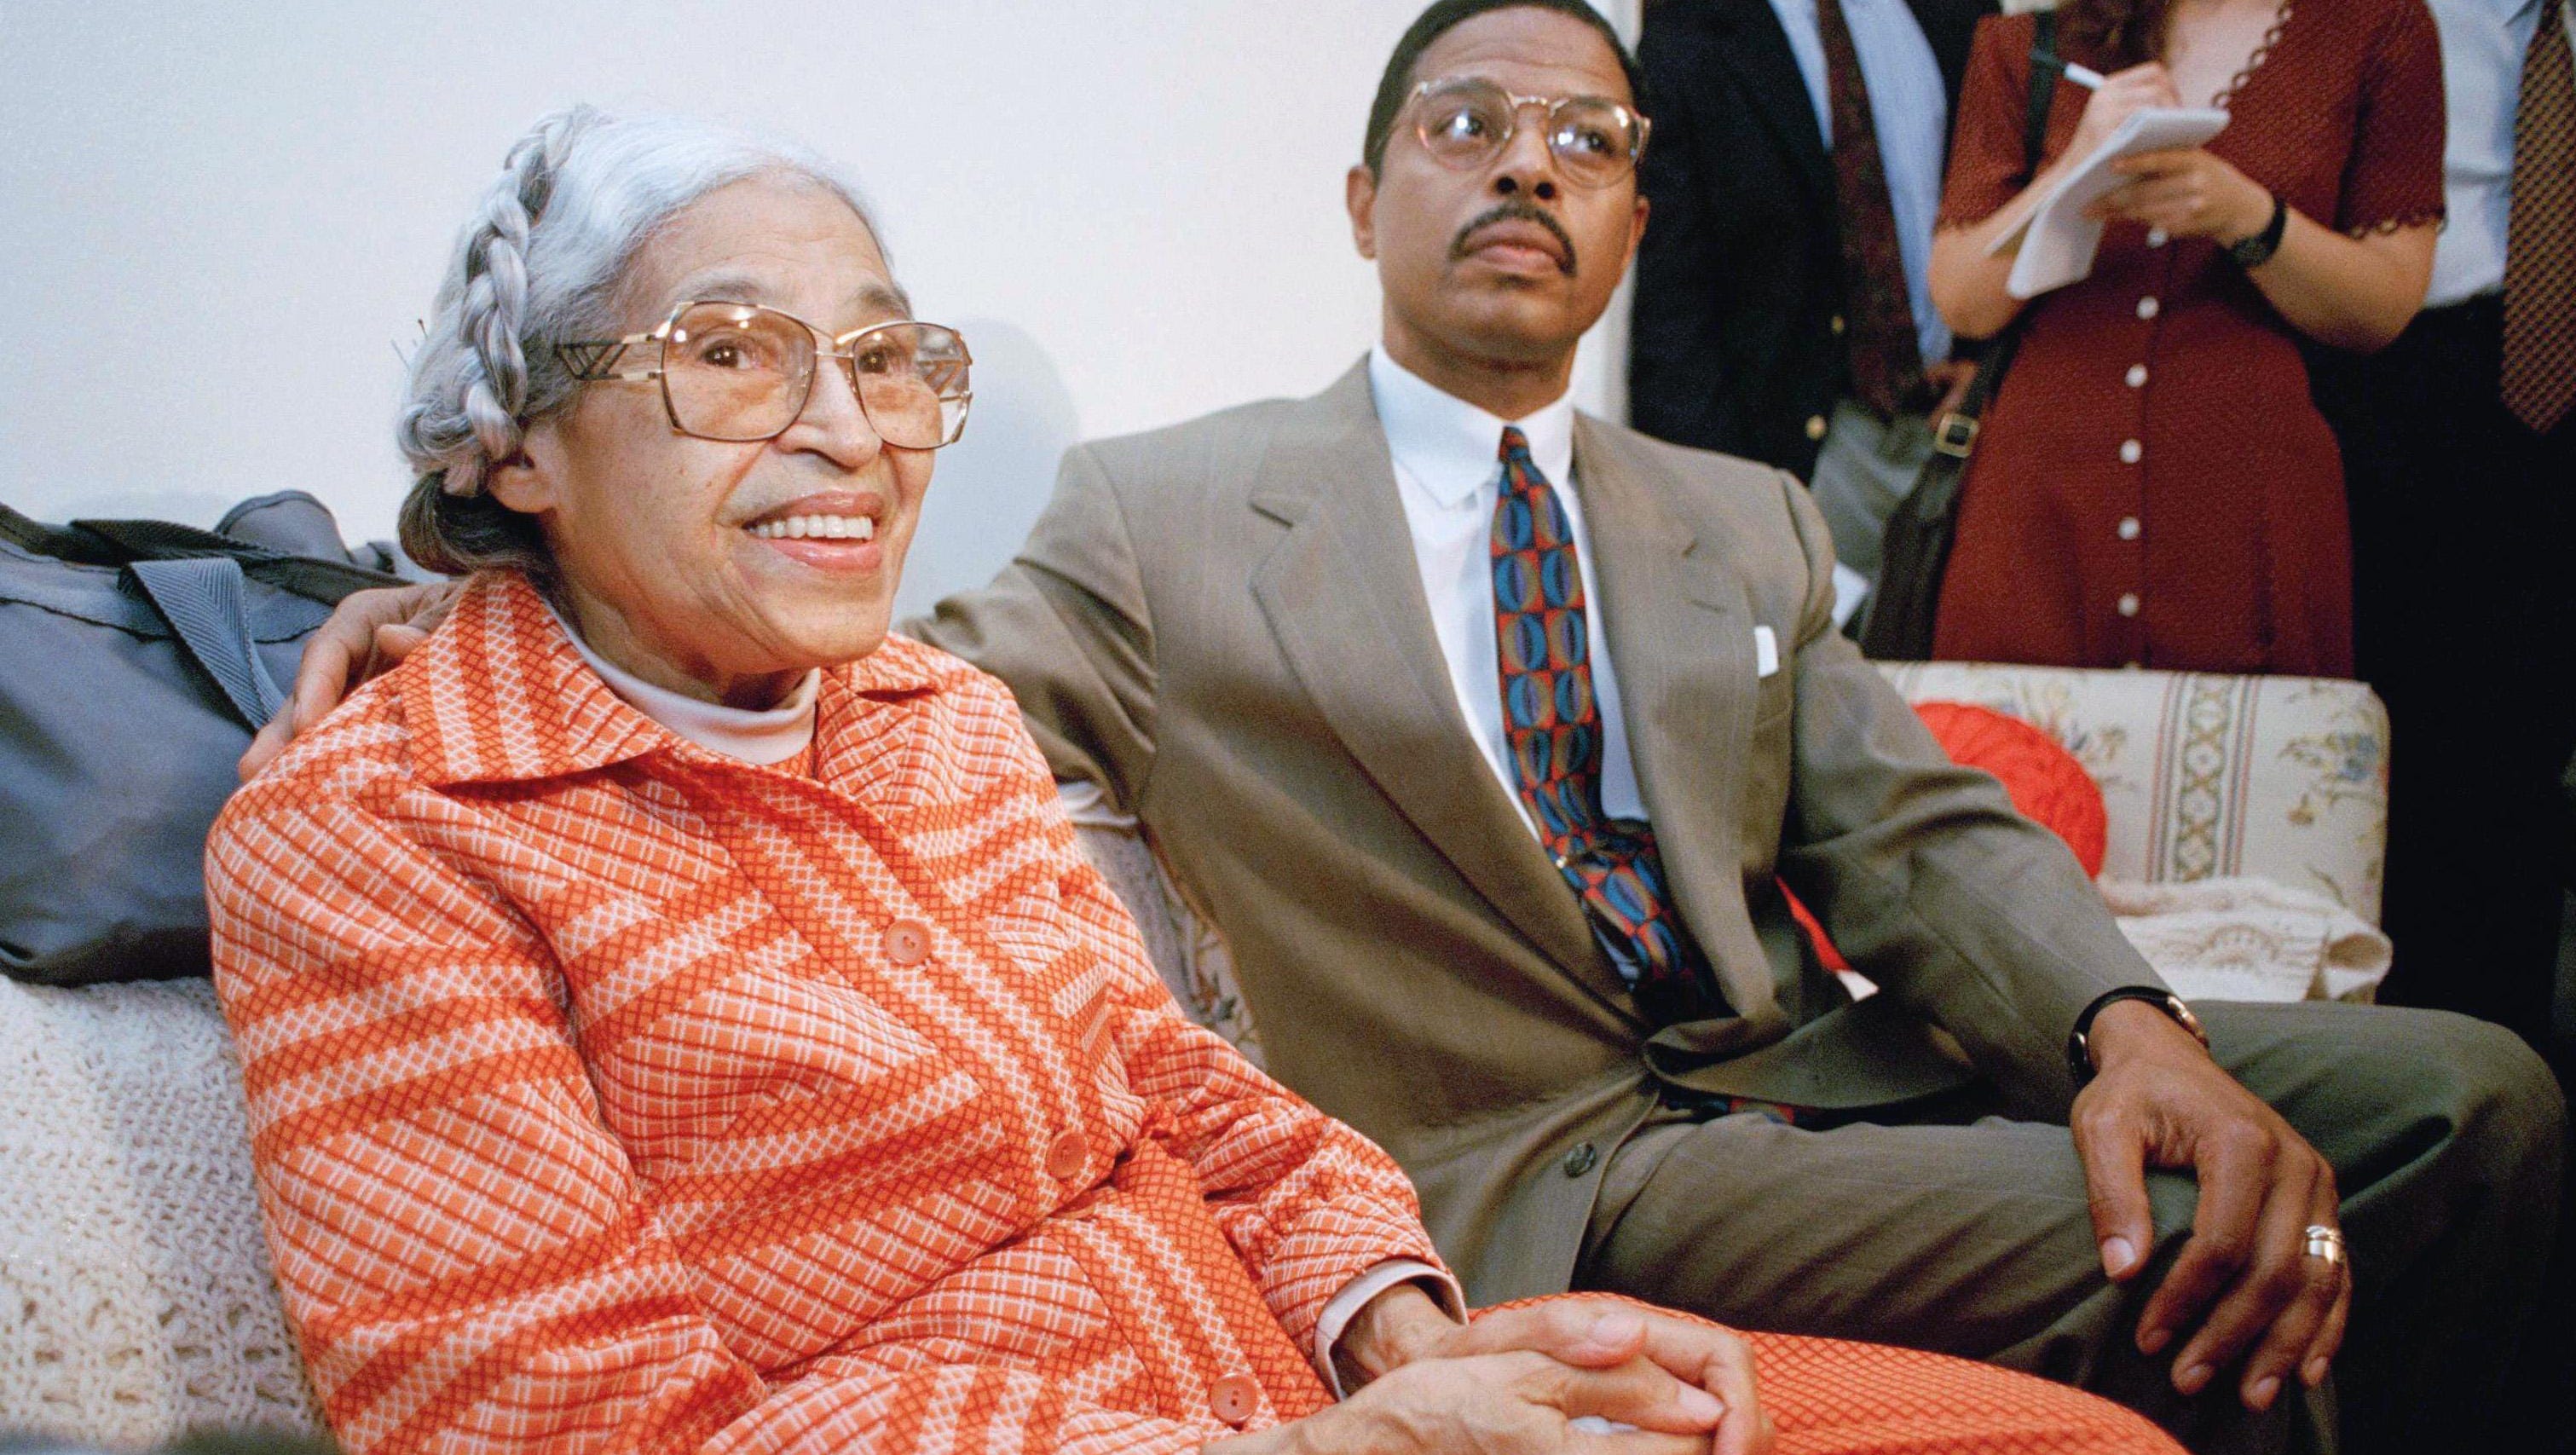 Rosa Parks' lawyer at center of missing artifacts case